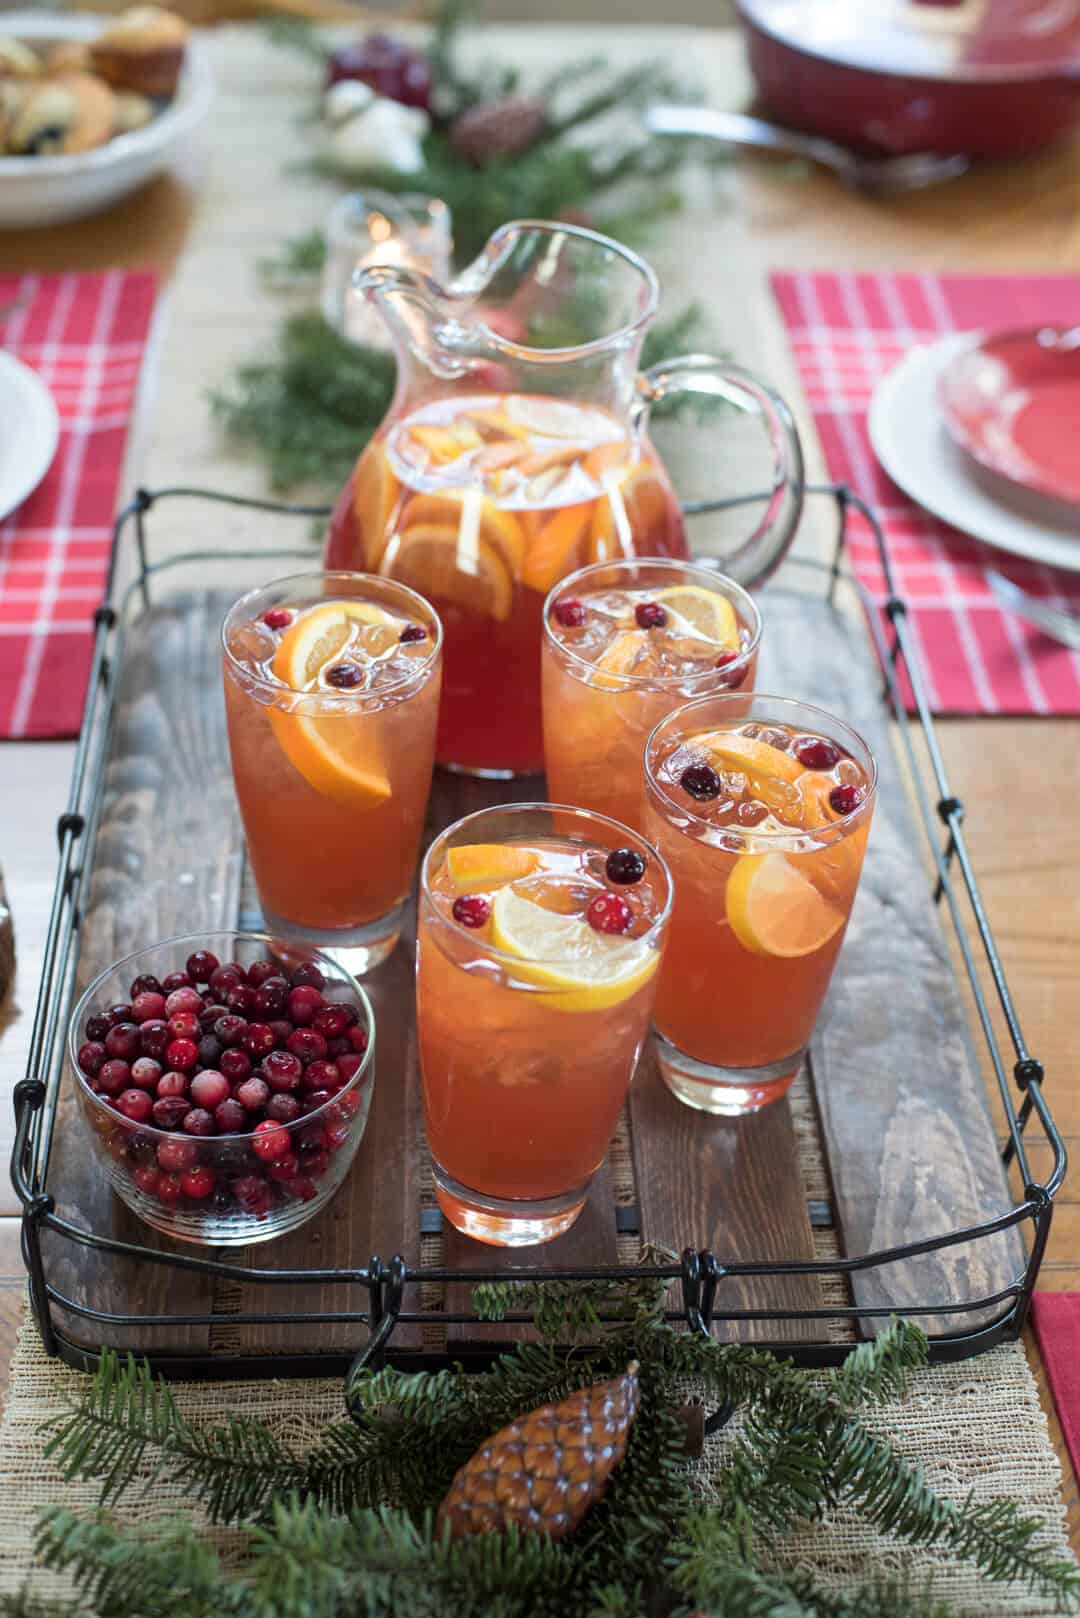 Glasses and a pitcher of iced tea on a wooden tray on a table with Christmas decorations.